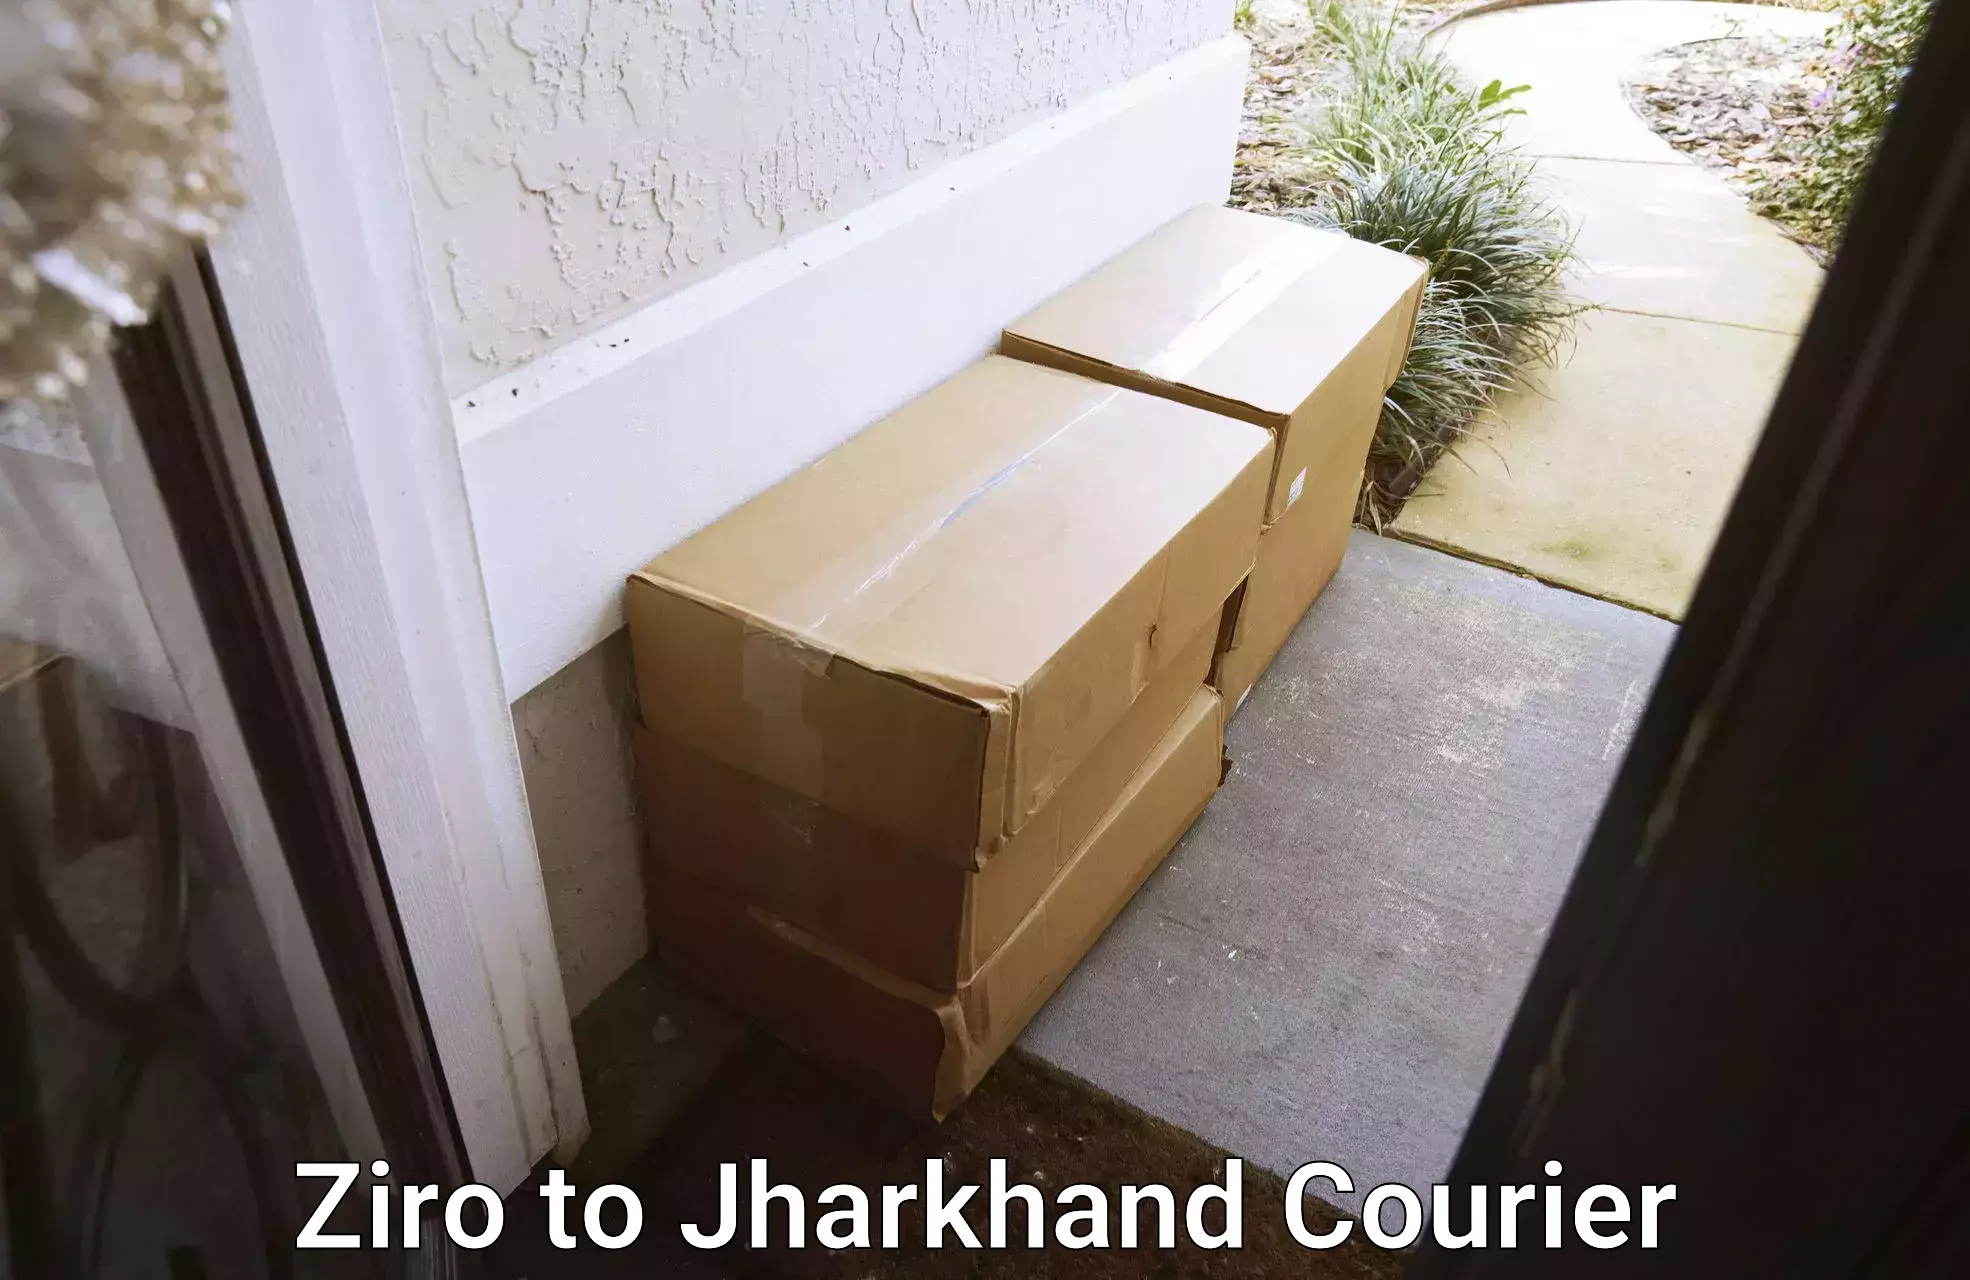 Express delivery solutions Ziro to Ranchi